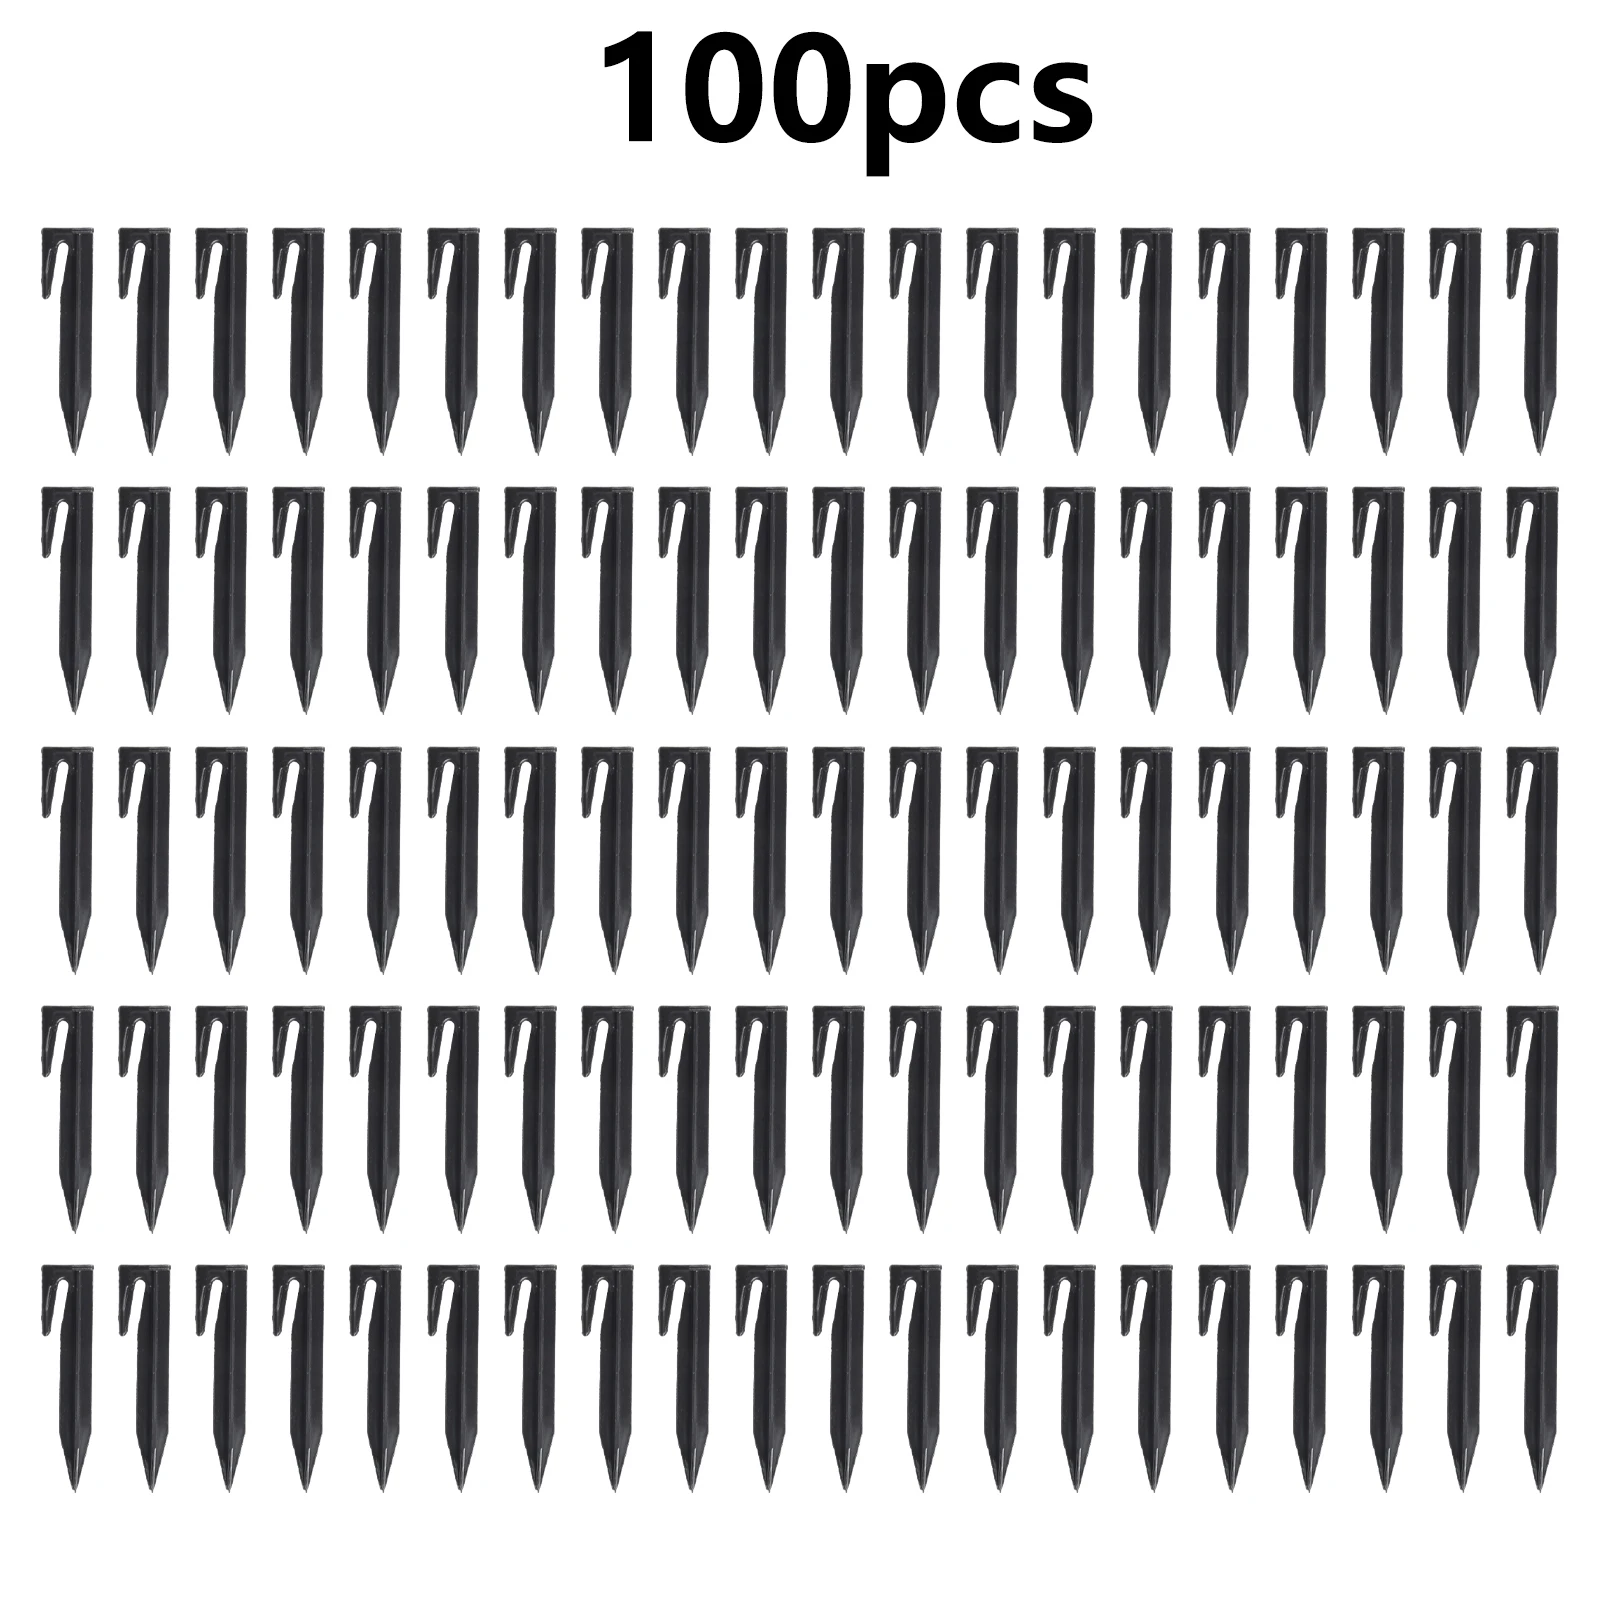 

100Pcs Lawn Mower Boundary Pegs For Securely Anchoring Robot Mower Perimeter Boundary Cable Lawn Nails Accessories Replacement